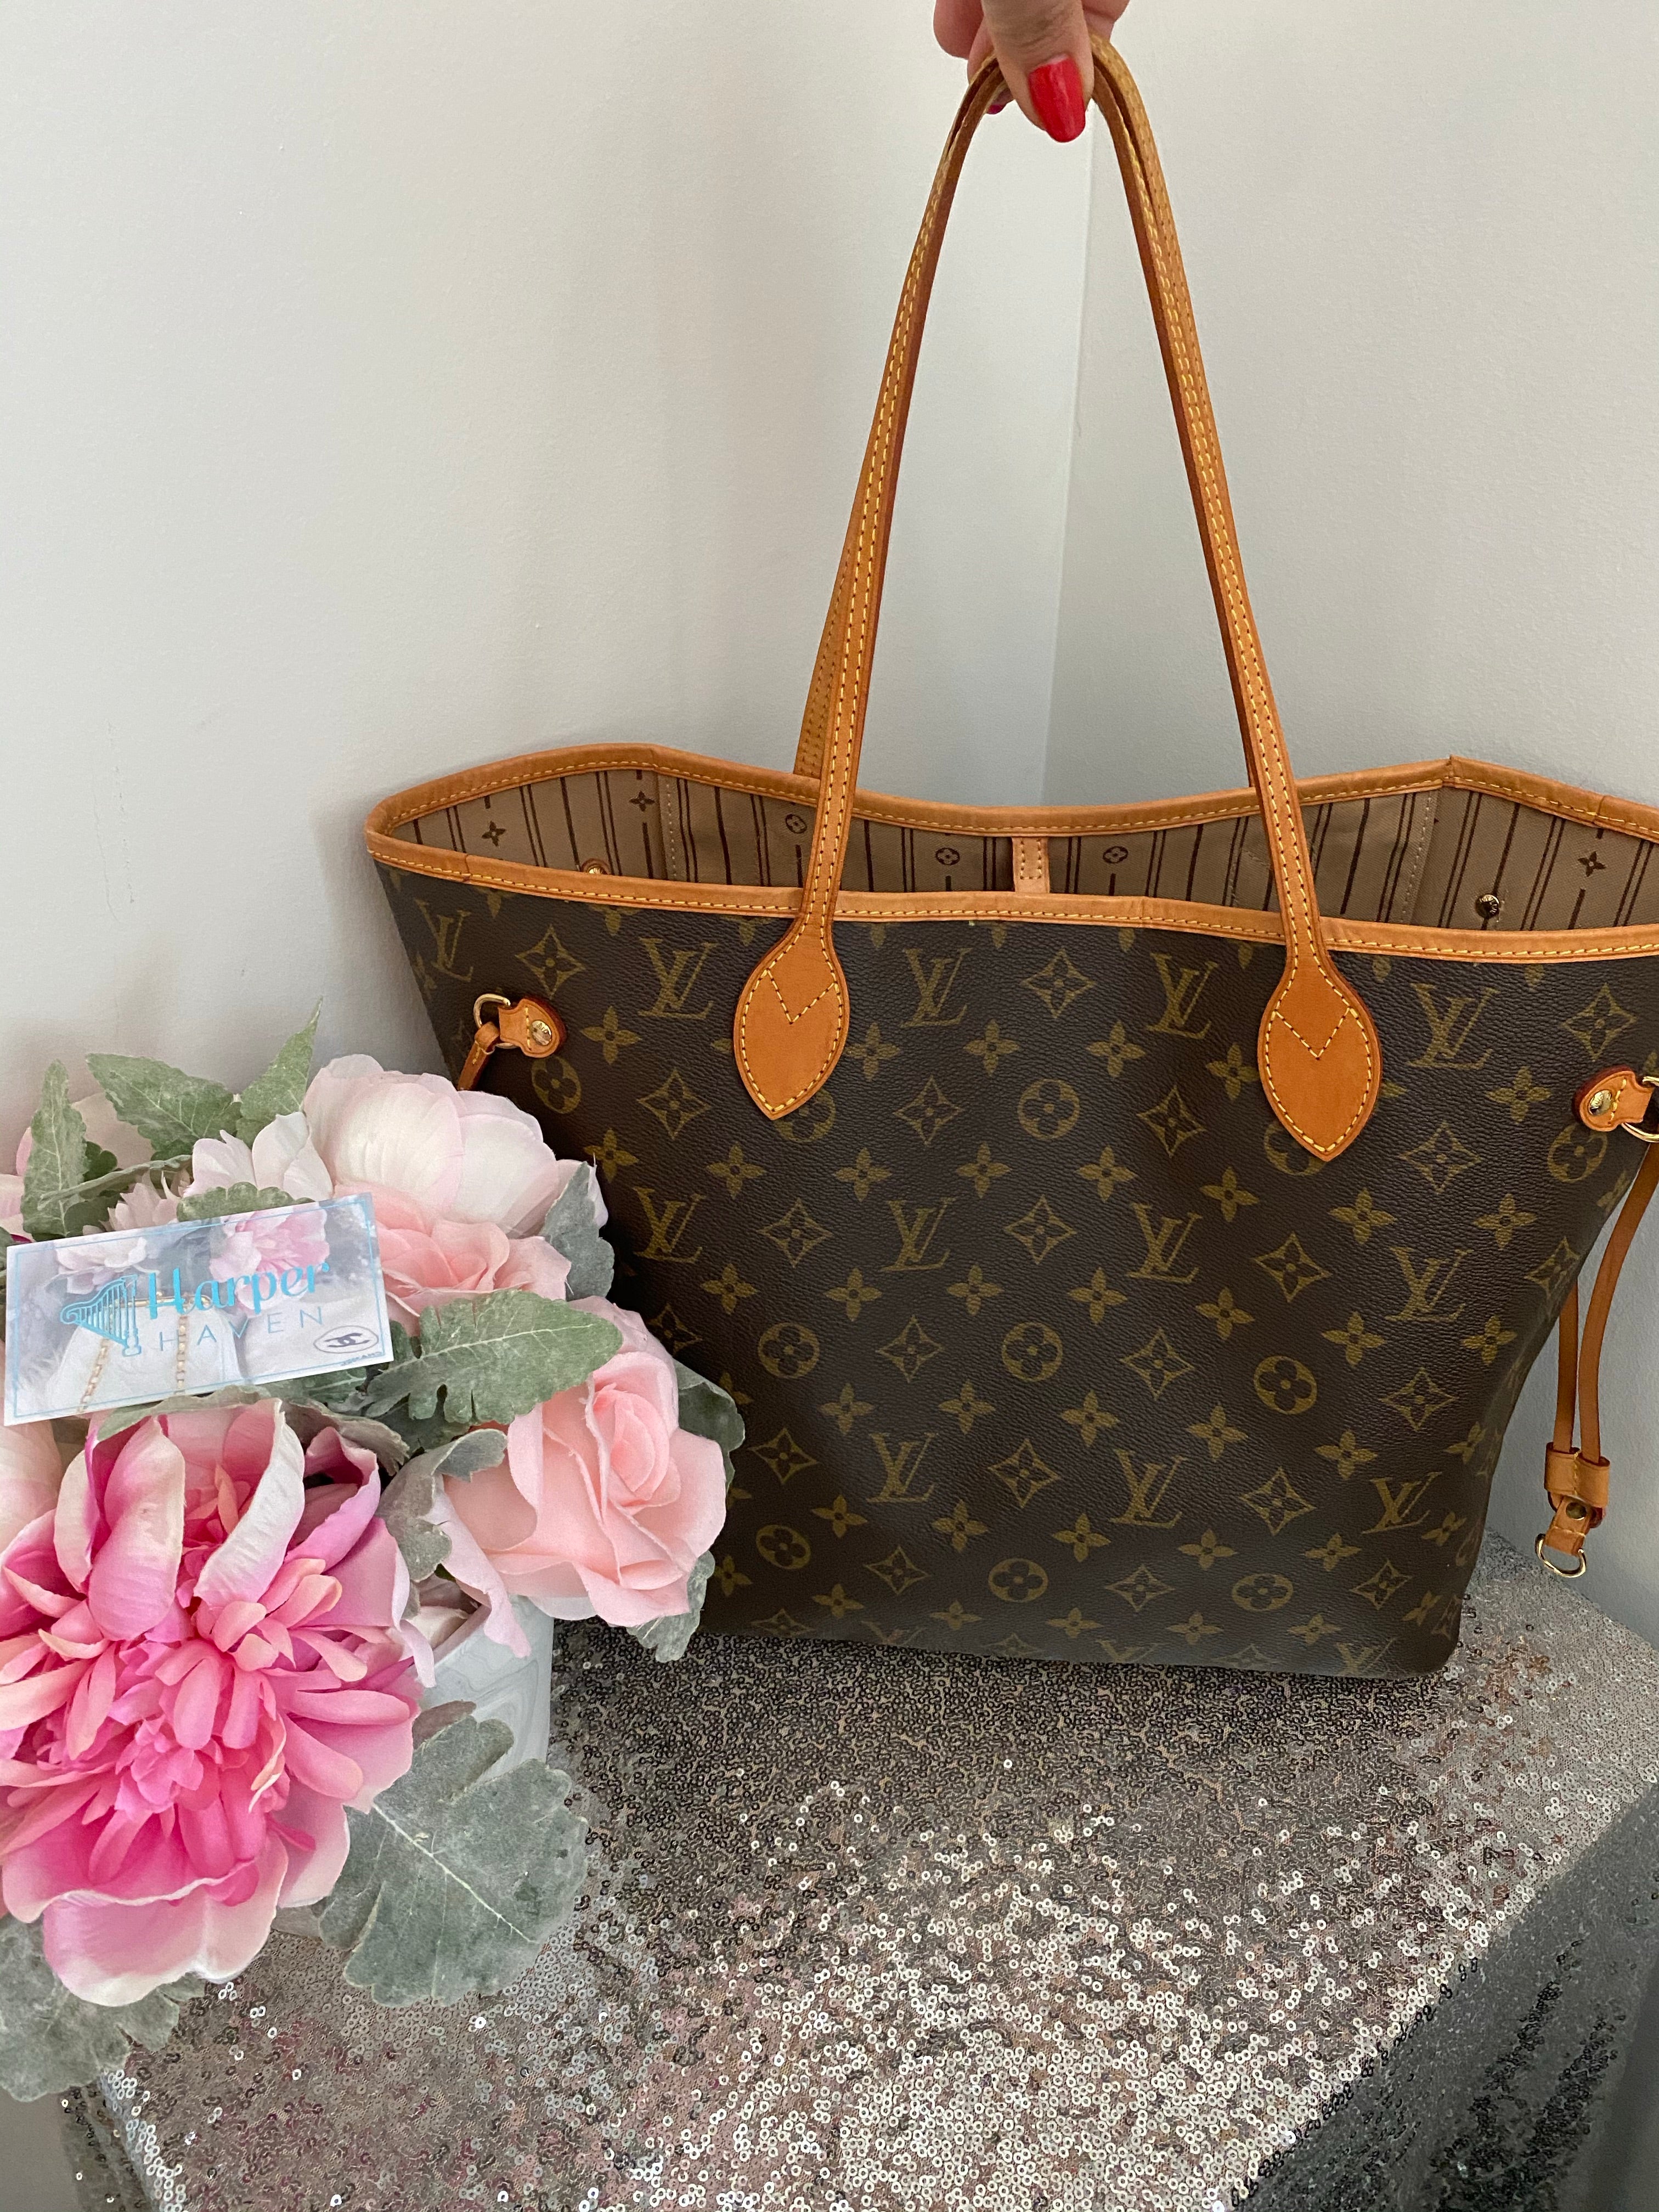 New arrivals at Harpers Pt! LOUIS VUITTON Neverfull GM … $1349